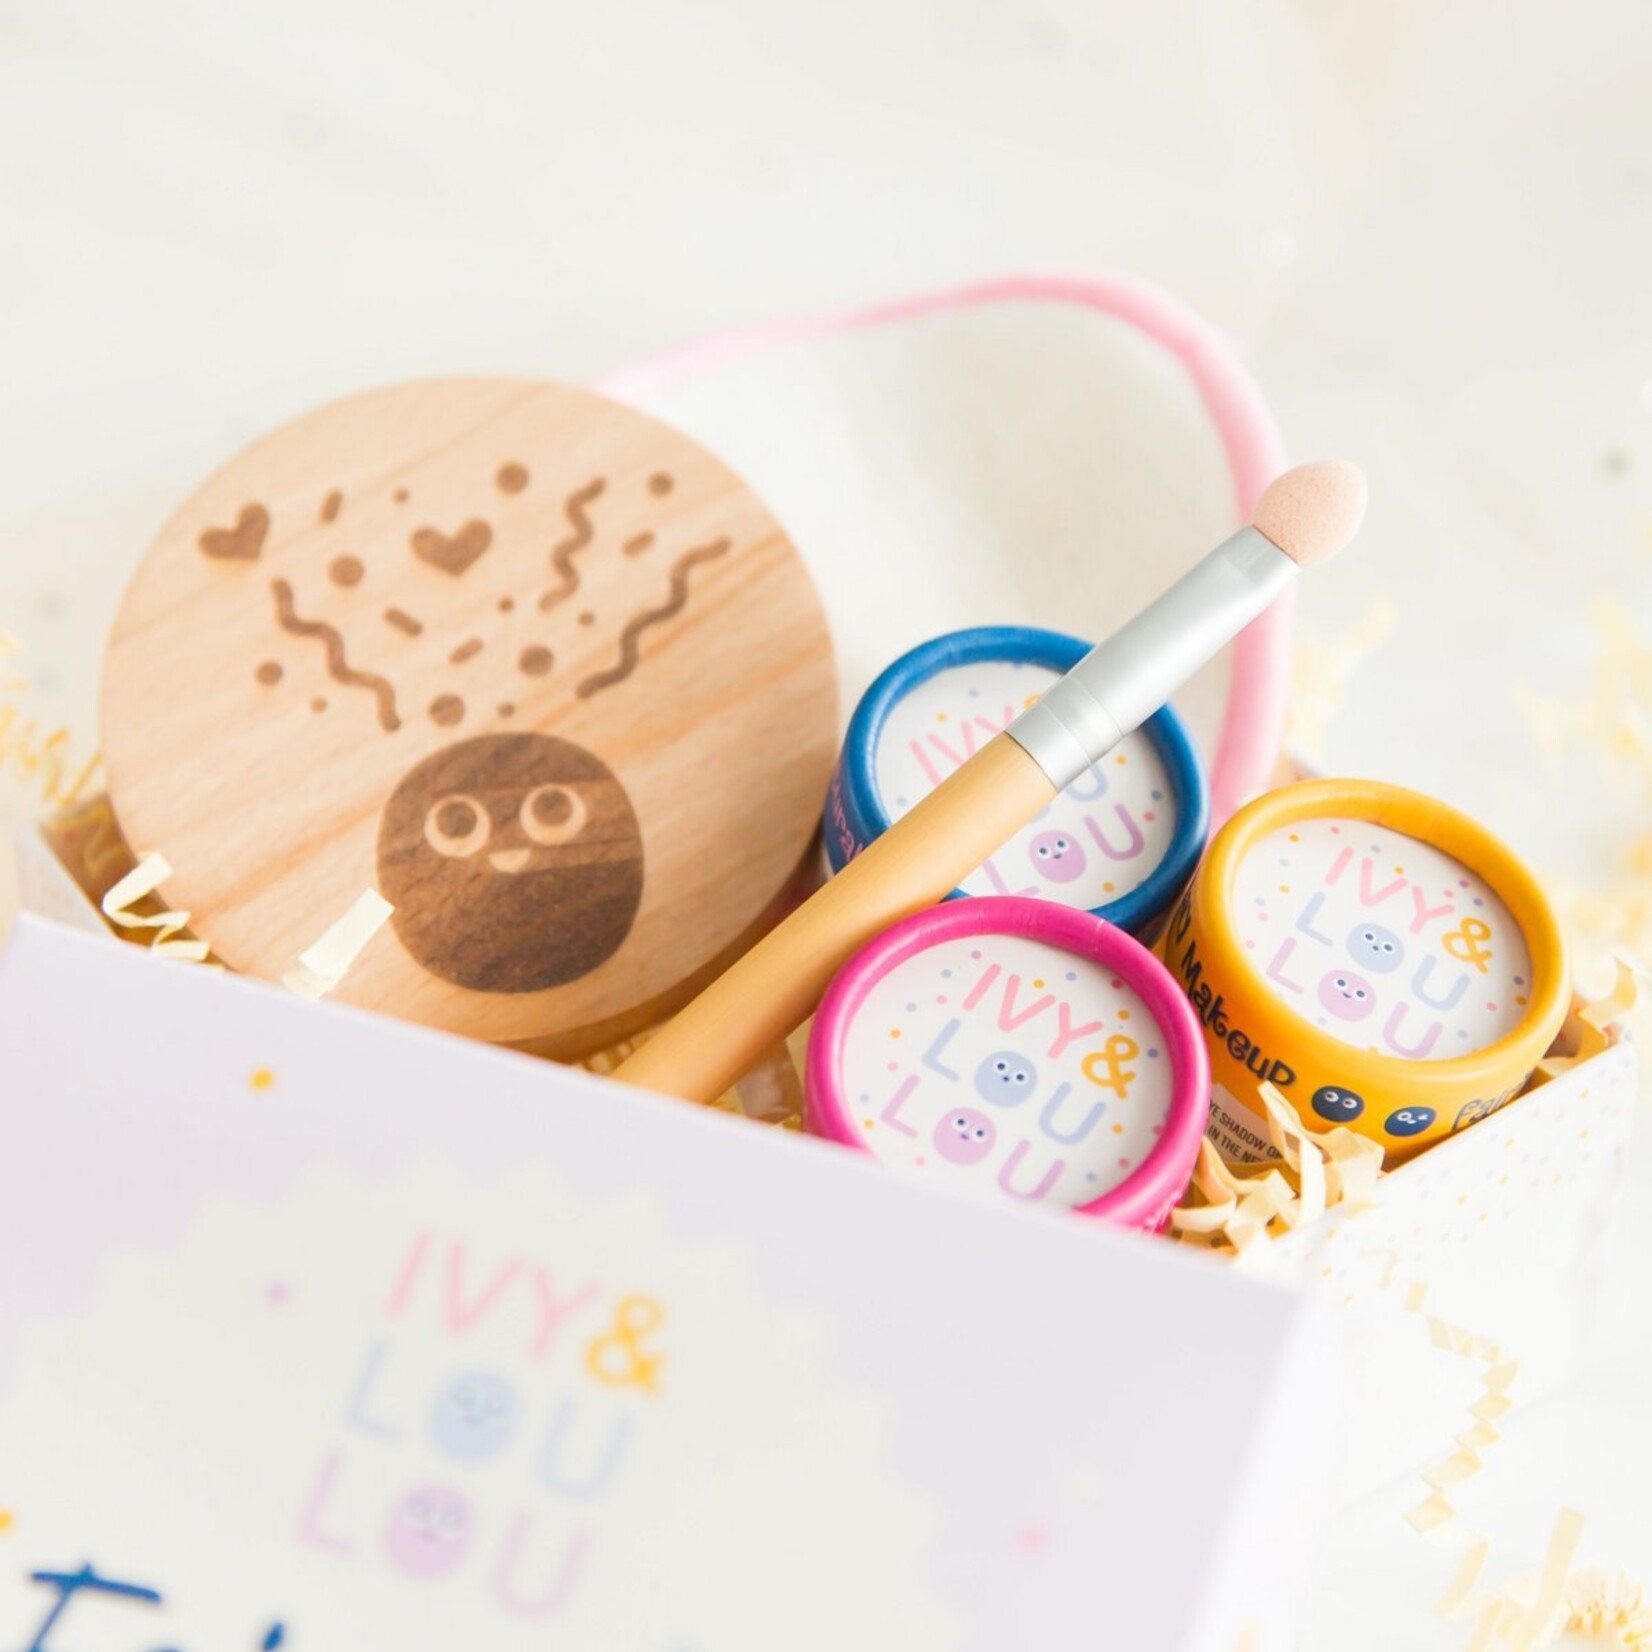 Ivy & Loulou Fairy Fun Giftset